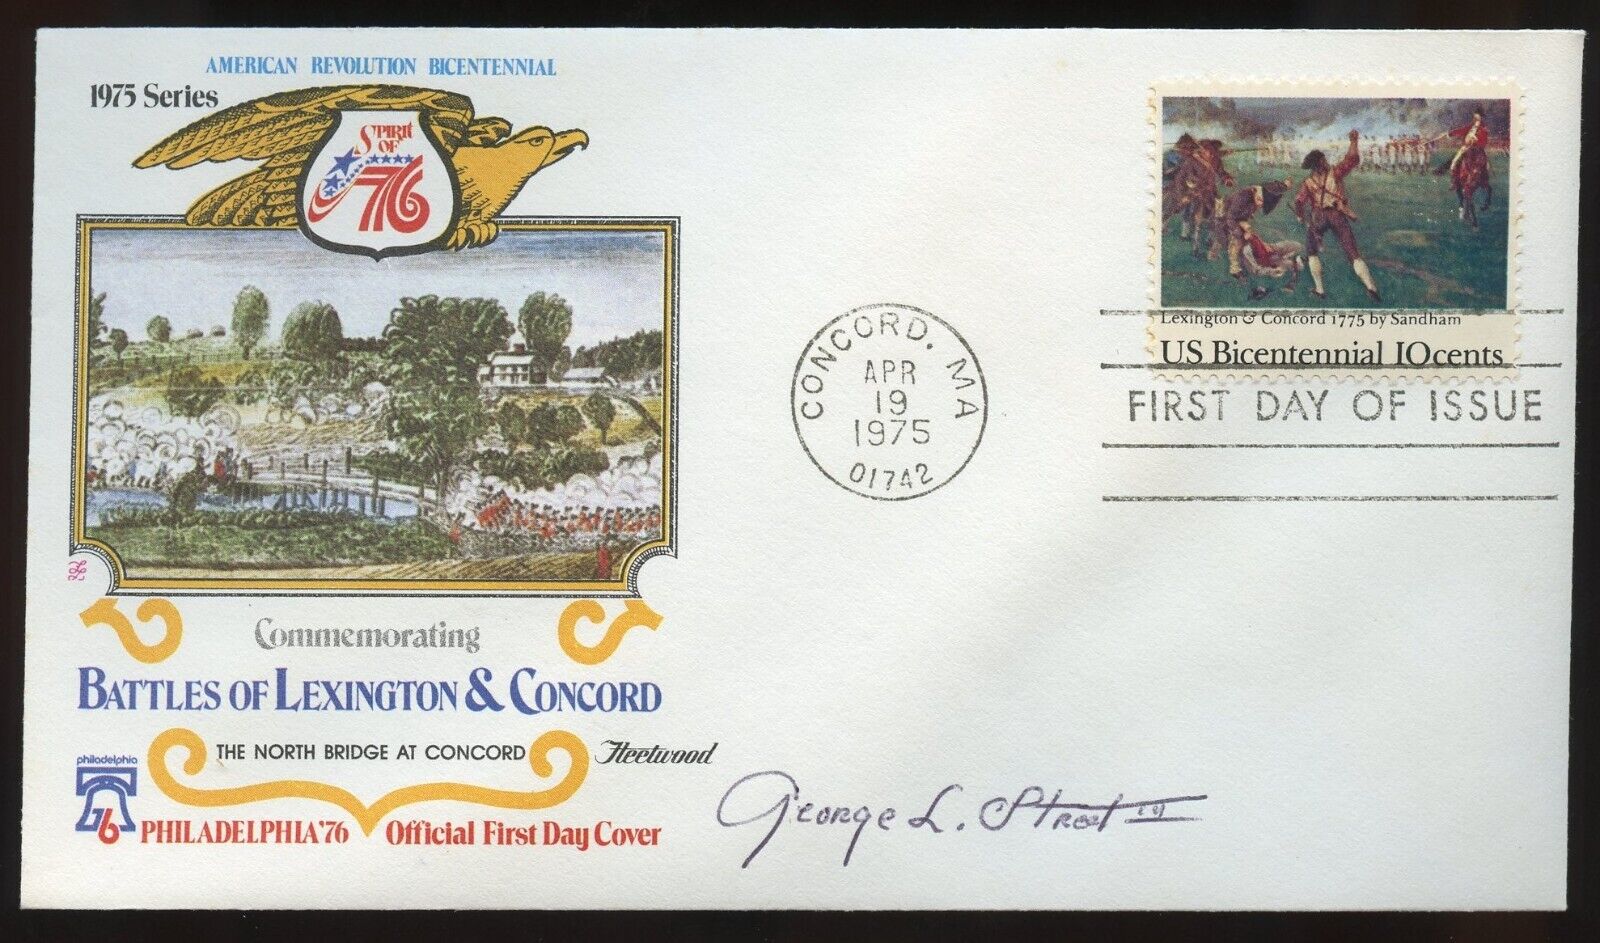 George L. Street d2000 signed autograph FDC Medal of Honor Recipient USN WWII